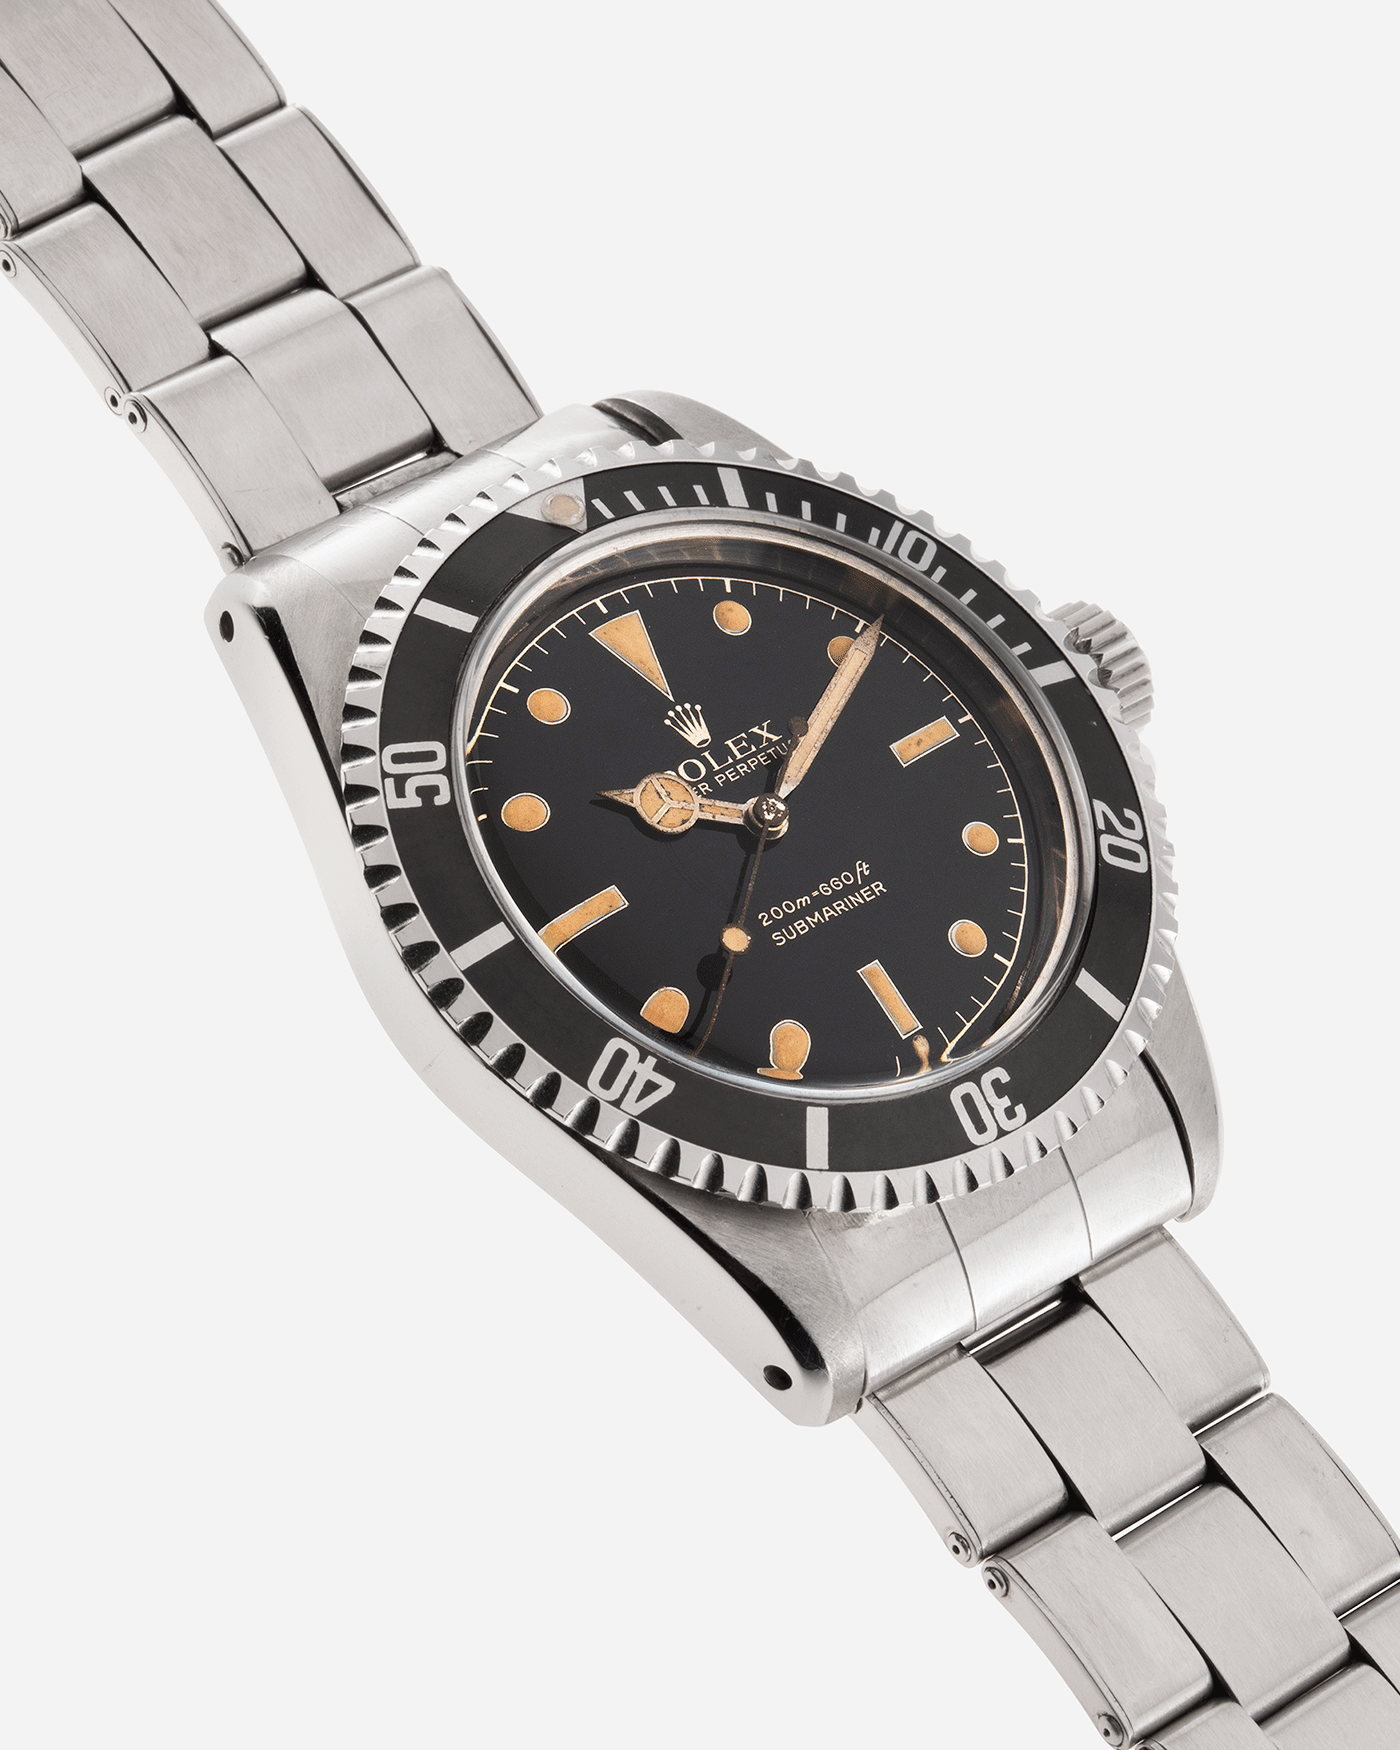 Brand: Rolex Model: Submariner Reference Number: 5512 Serial Number: 69XXXX Year: 1961 Material: Stainless Steel Movement: Cal. 1530 Case Diameter: 40mm Lug Width: 20mm Bracelet/Strap: Stainless Steel Rolex C&I Bracelet Stamped 74